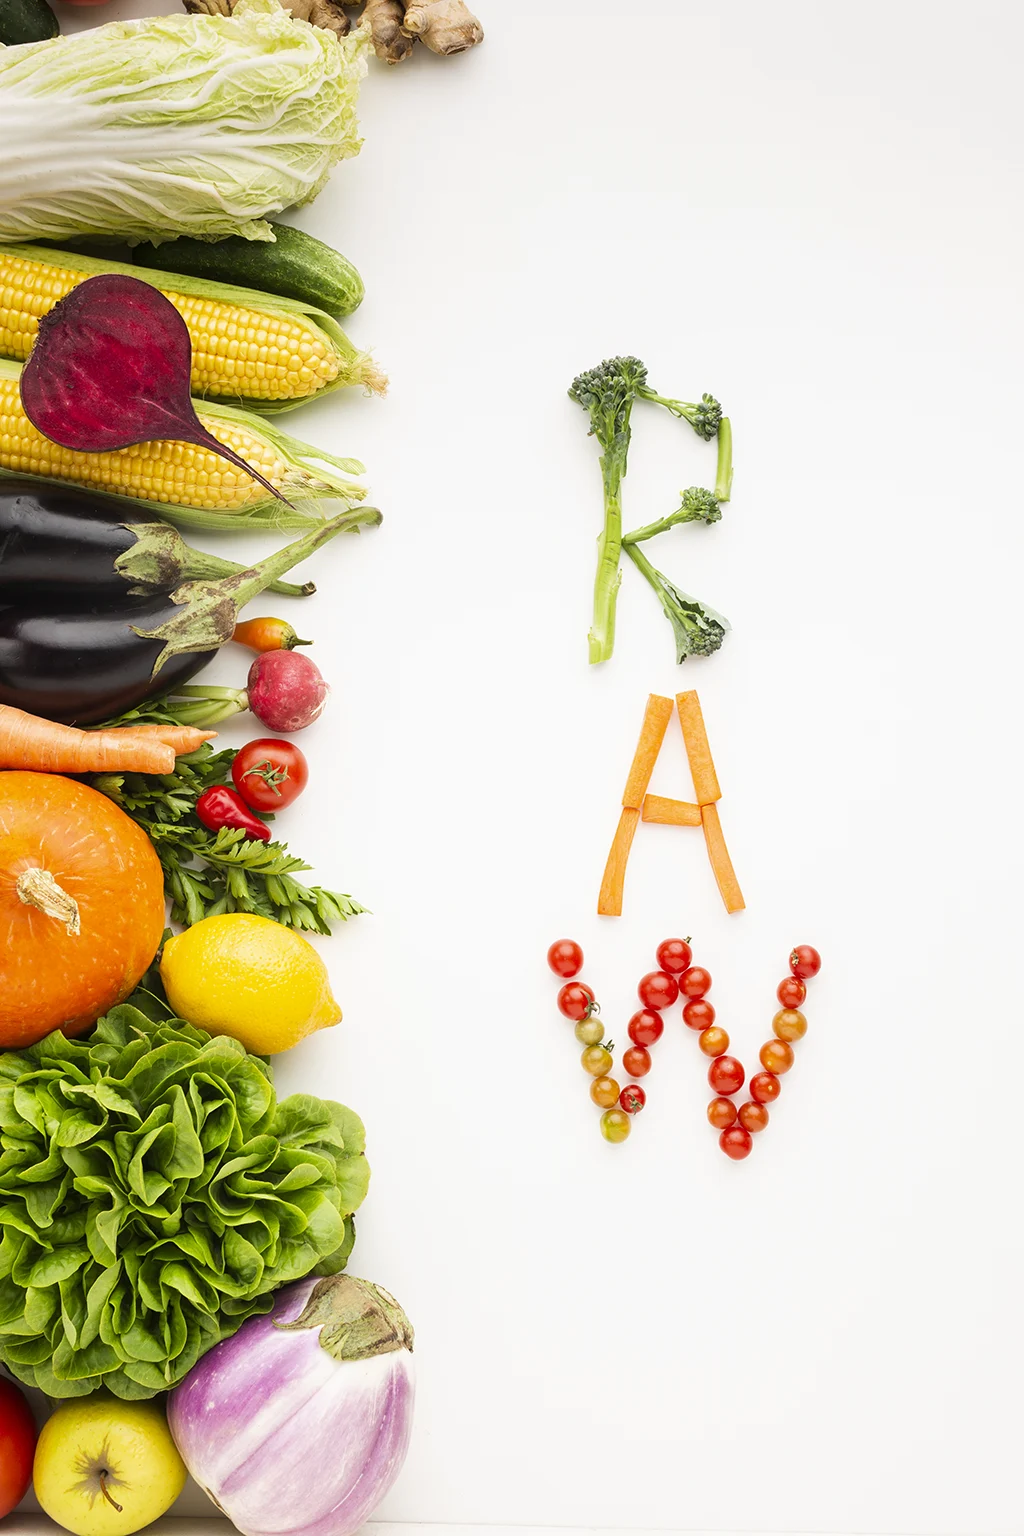 Vegetables spelling the word raw